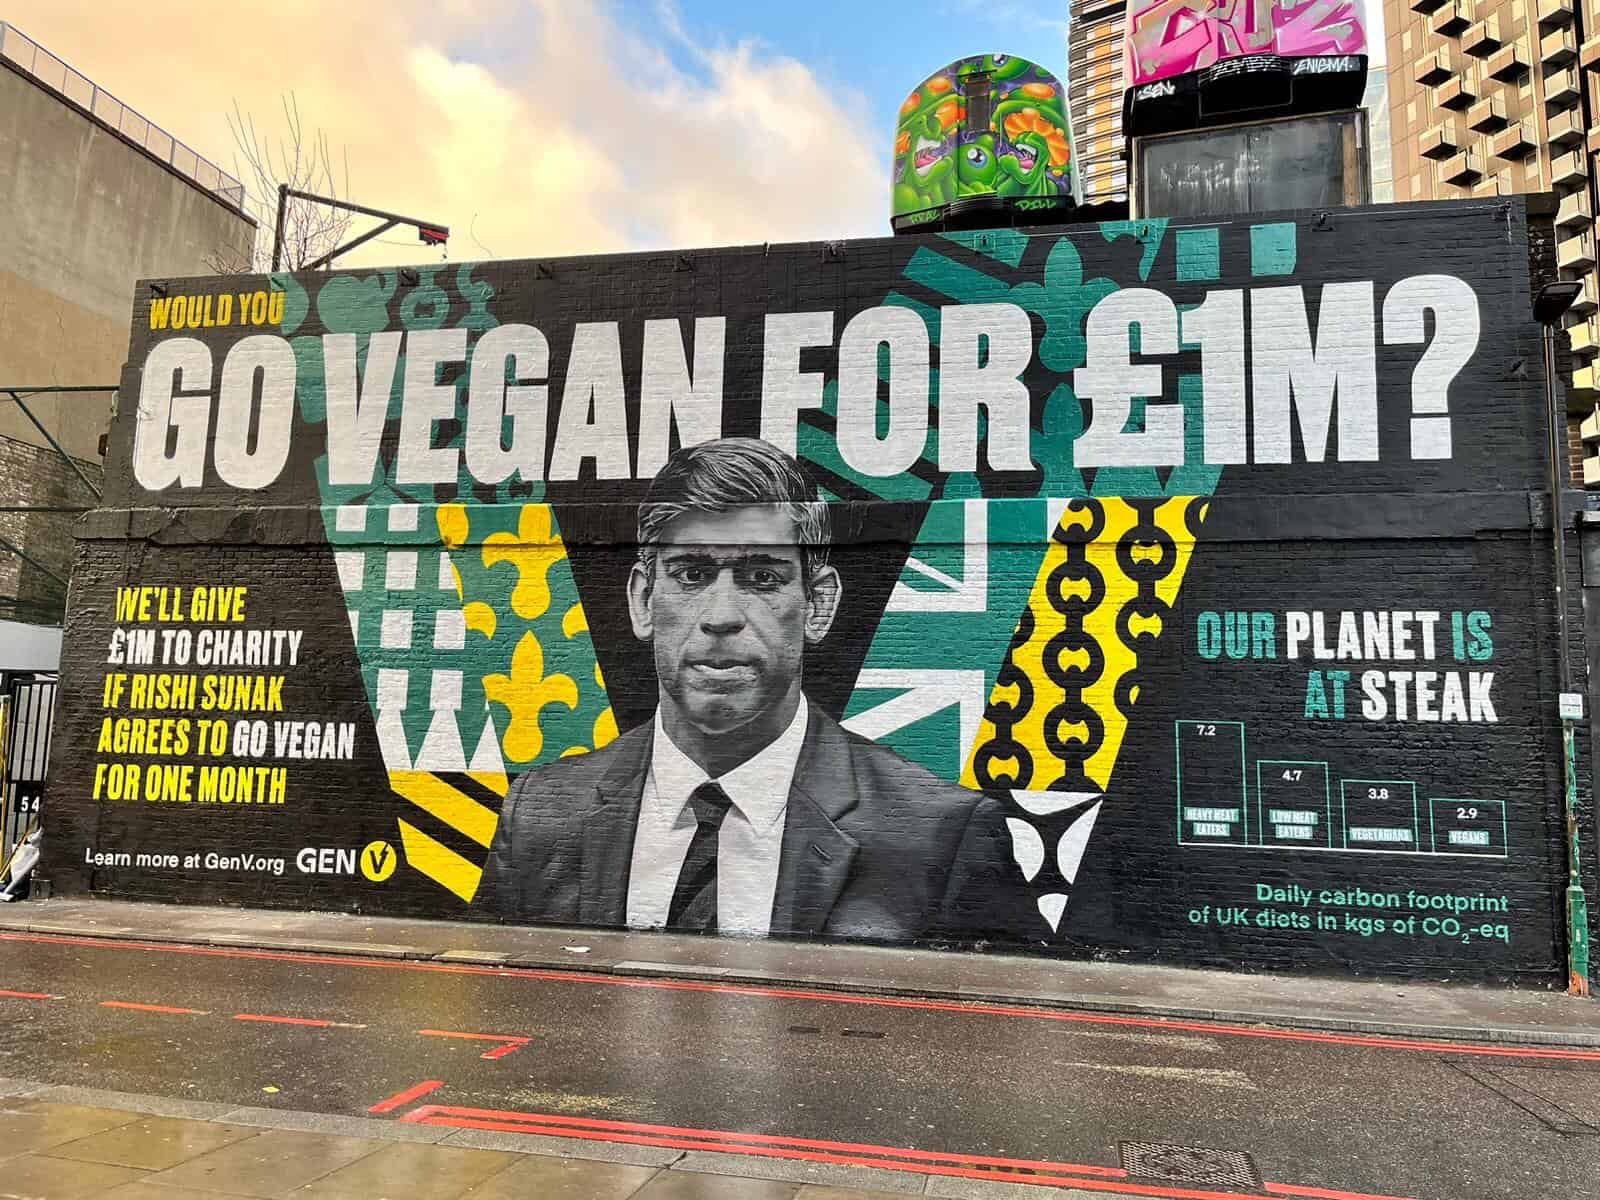 Charity offers Rishi Sunak £1 million to go vegan for a month